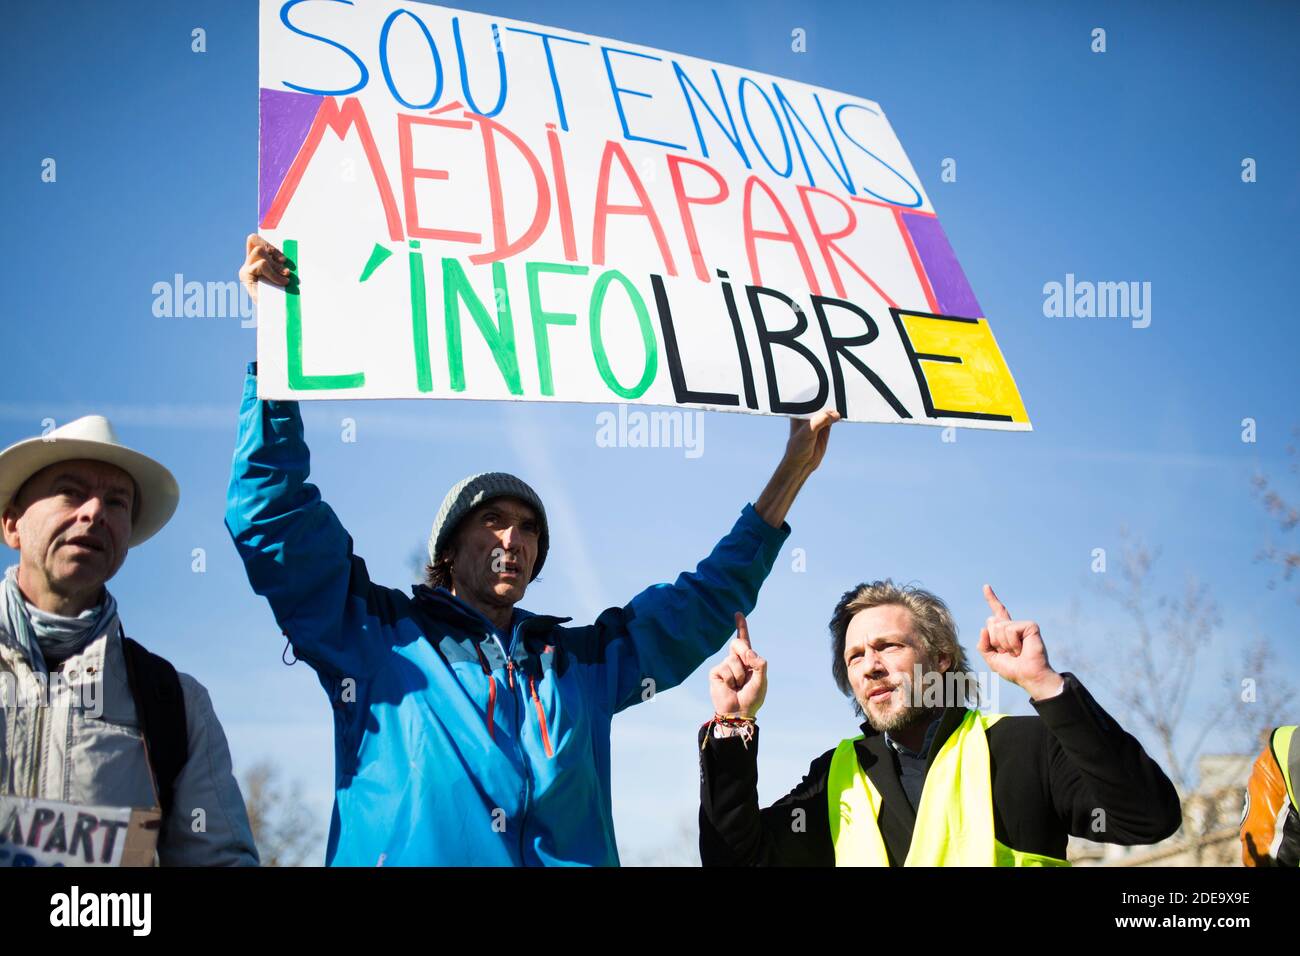 Jean baptiste redde alias Voltuan hold a sign "Support Mediapart, free  information". ( Soutenons mediapart l'info libre) People take part in a  demonstration called by the yellow vest (gilets jaunes) movement on